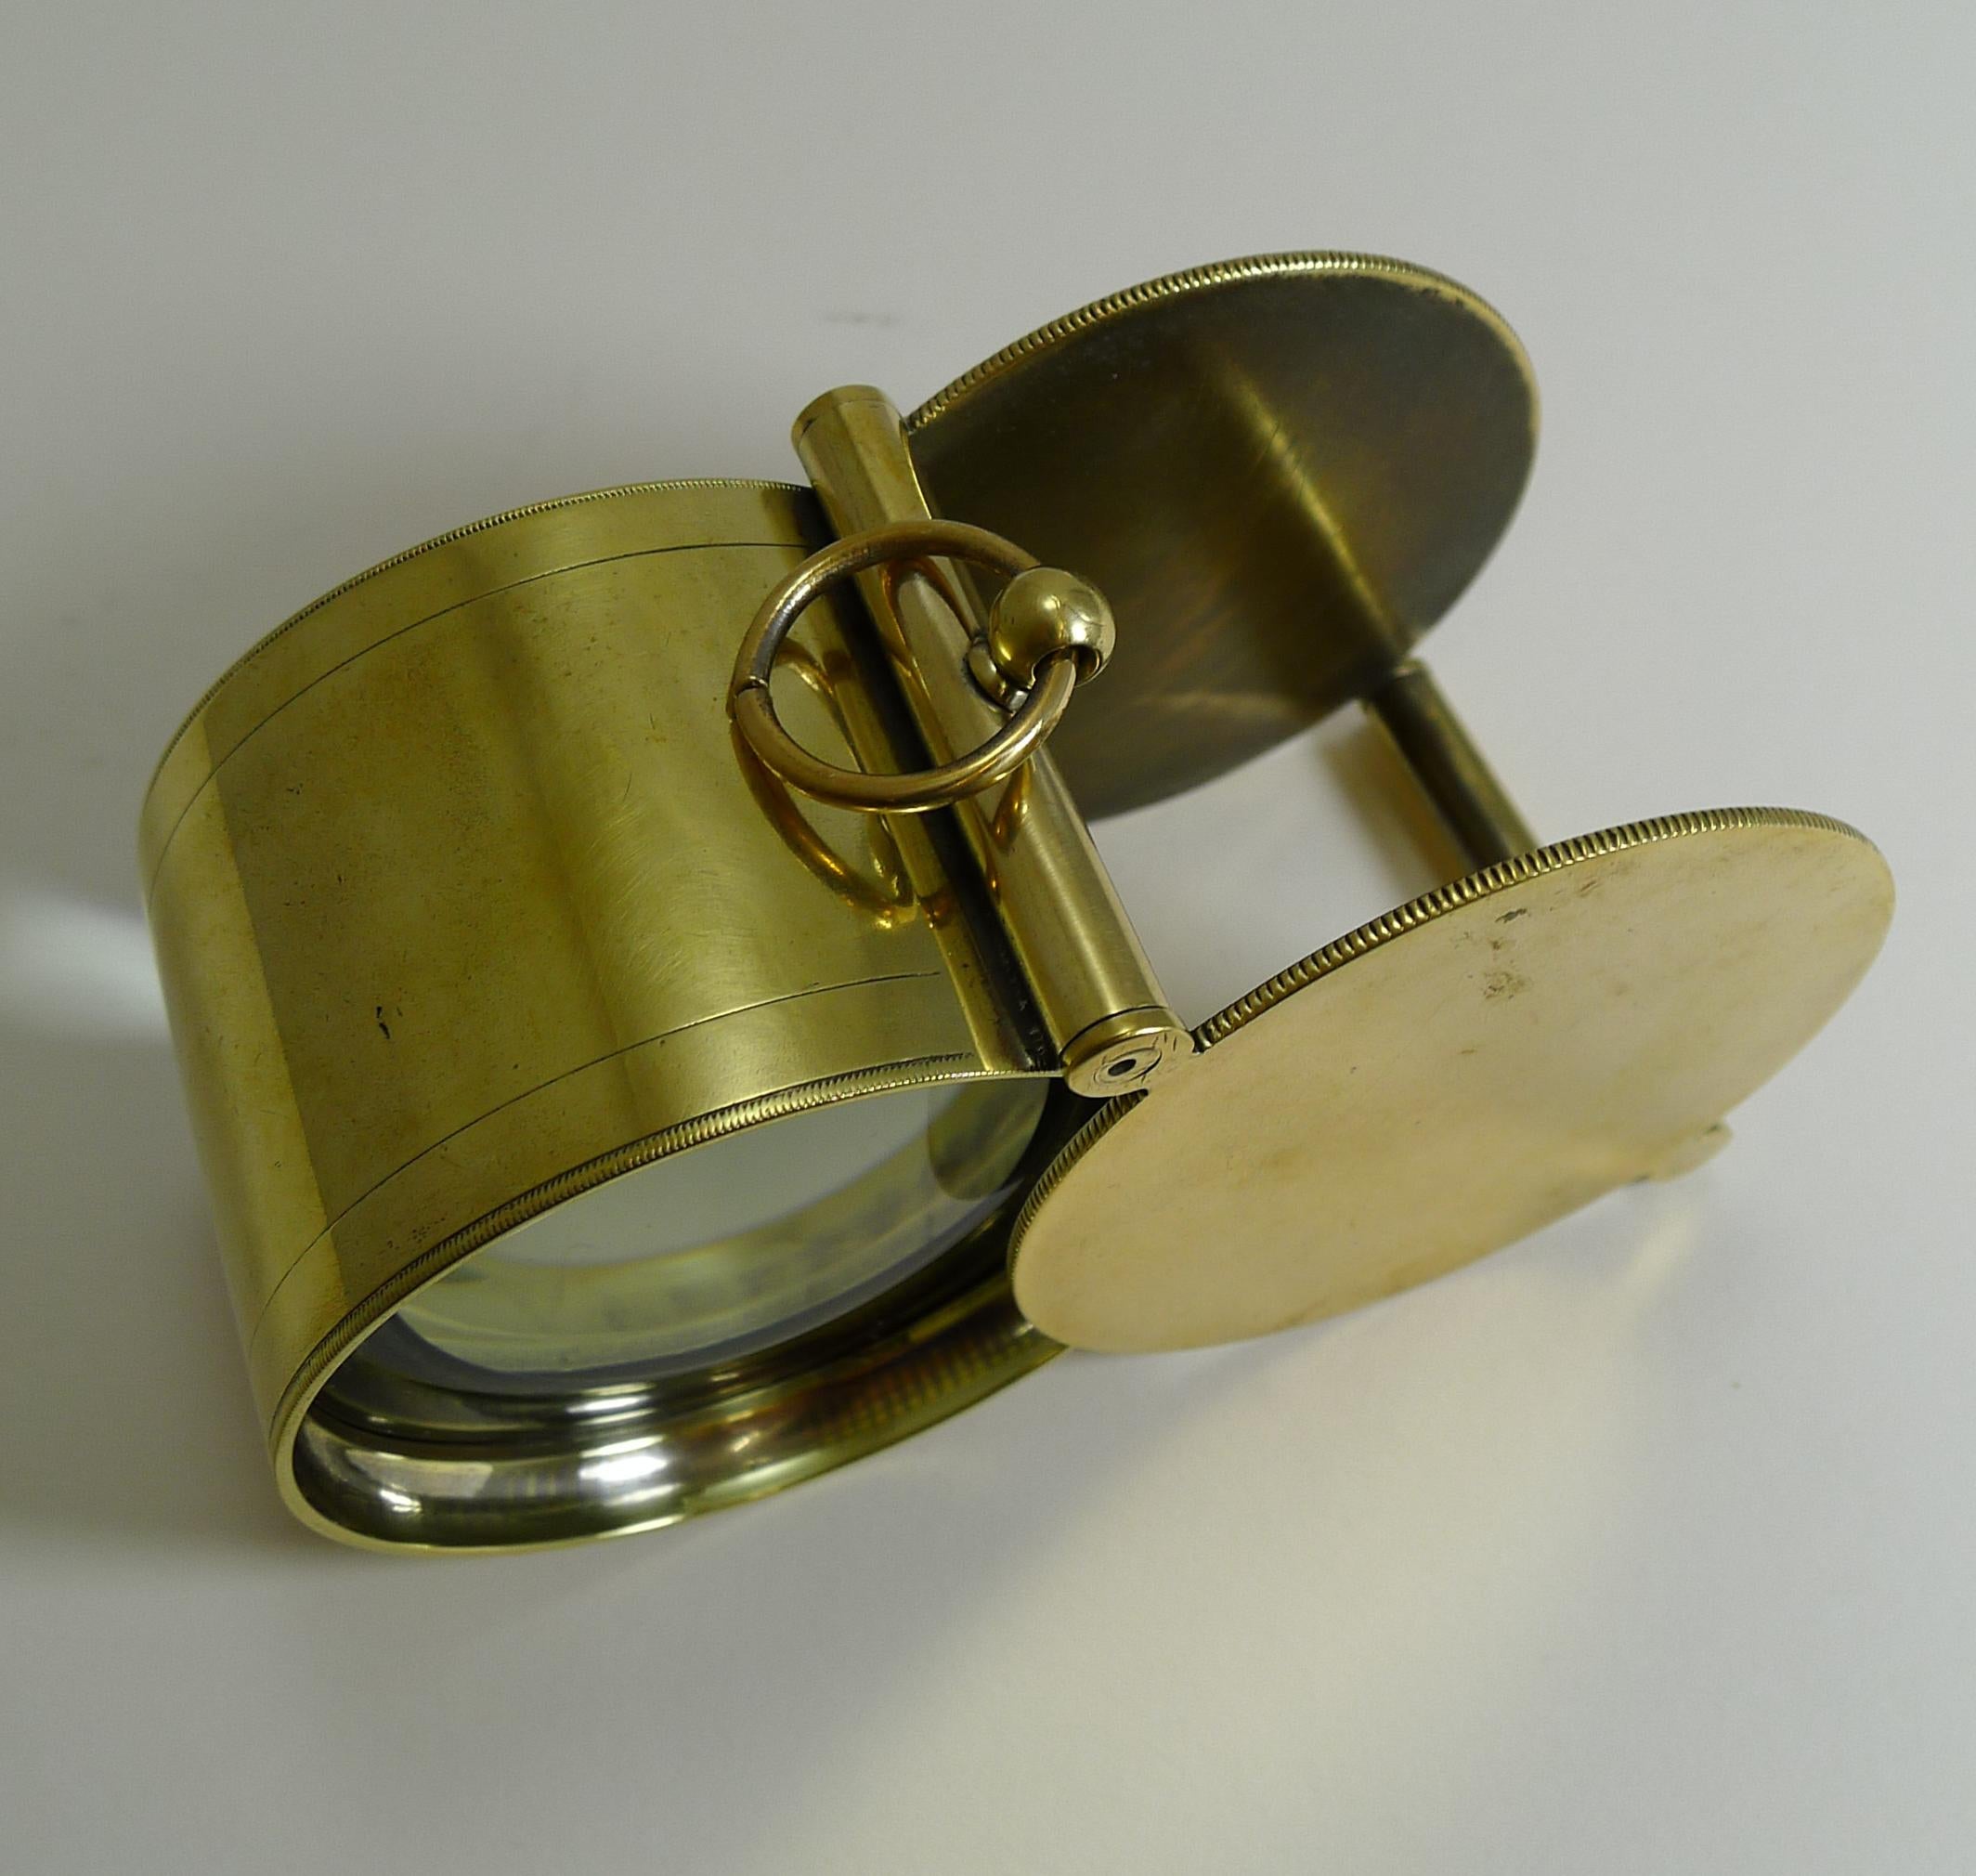 This the largest magnifying glass of this type that I have come across. Usually, they are a much smaller portable size suitable just to pop in the pocket. This one however measures 3 1/4